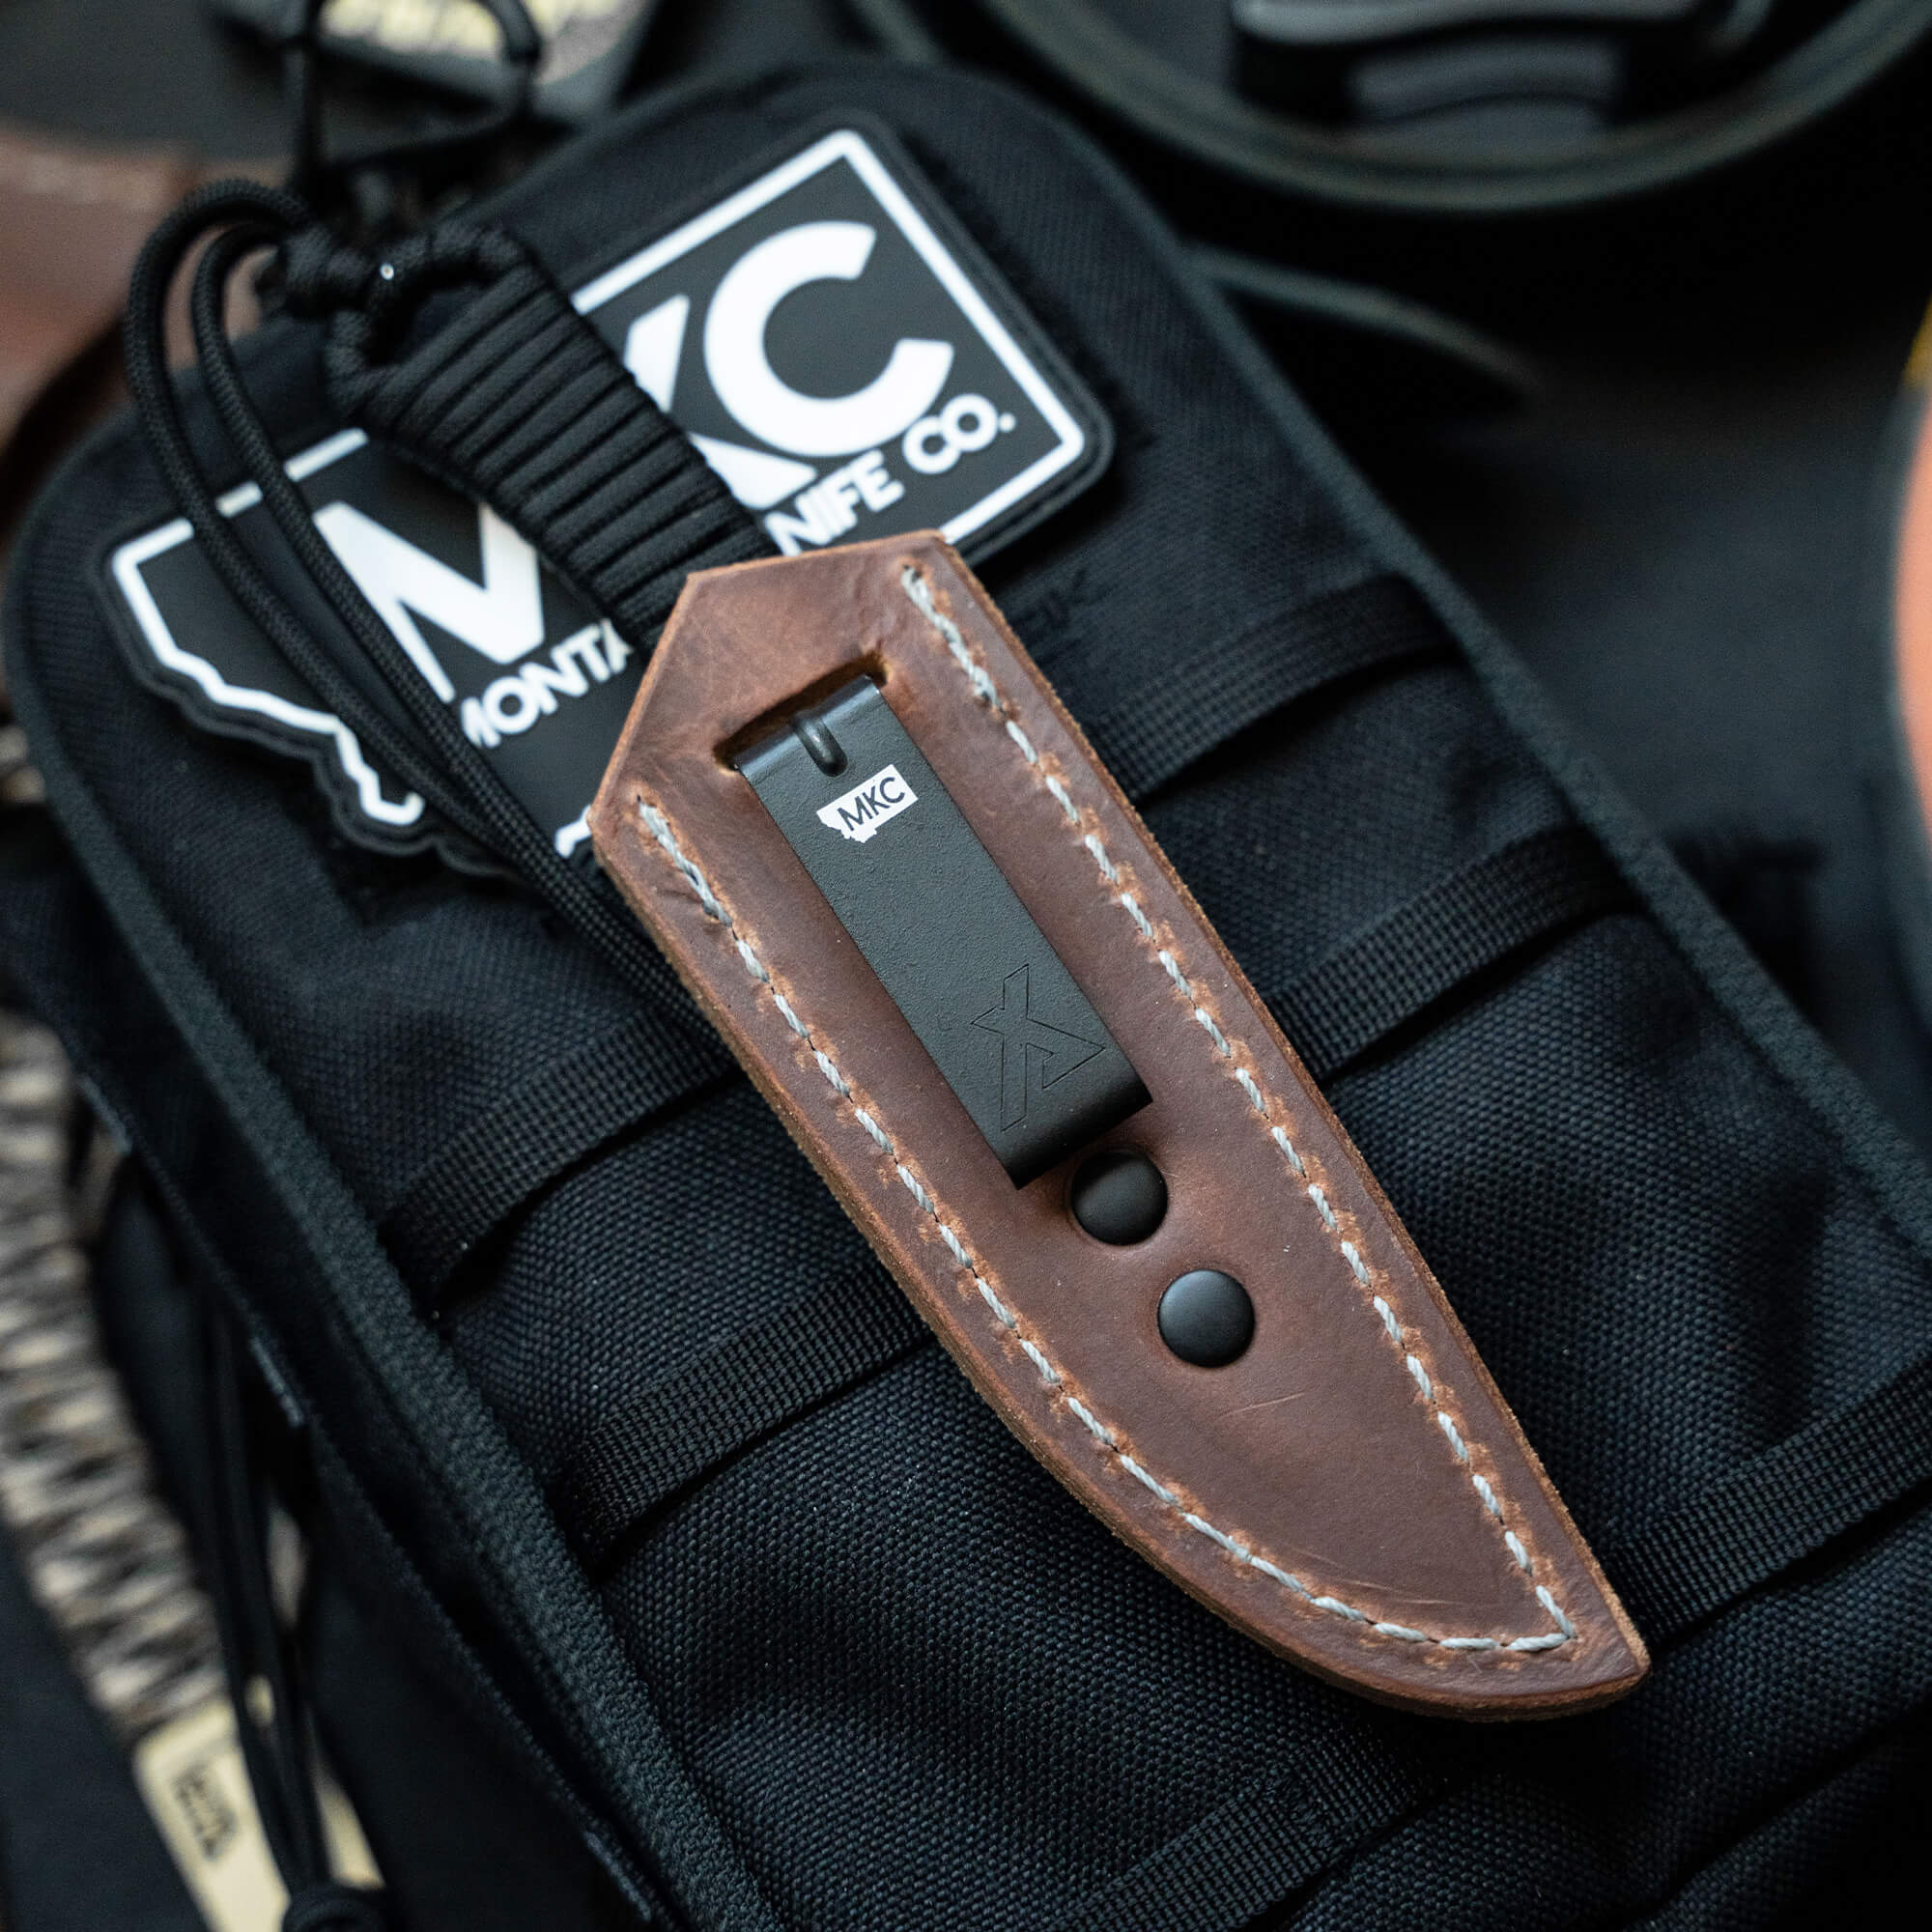 MINI-SPEEDGOAT LEATHER SHEATH - CONCEALED POCKET CARRY